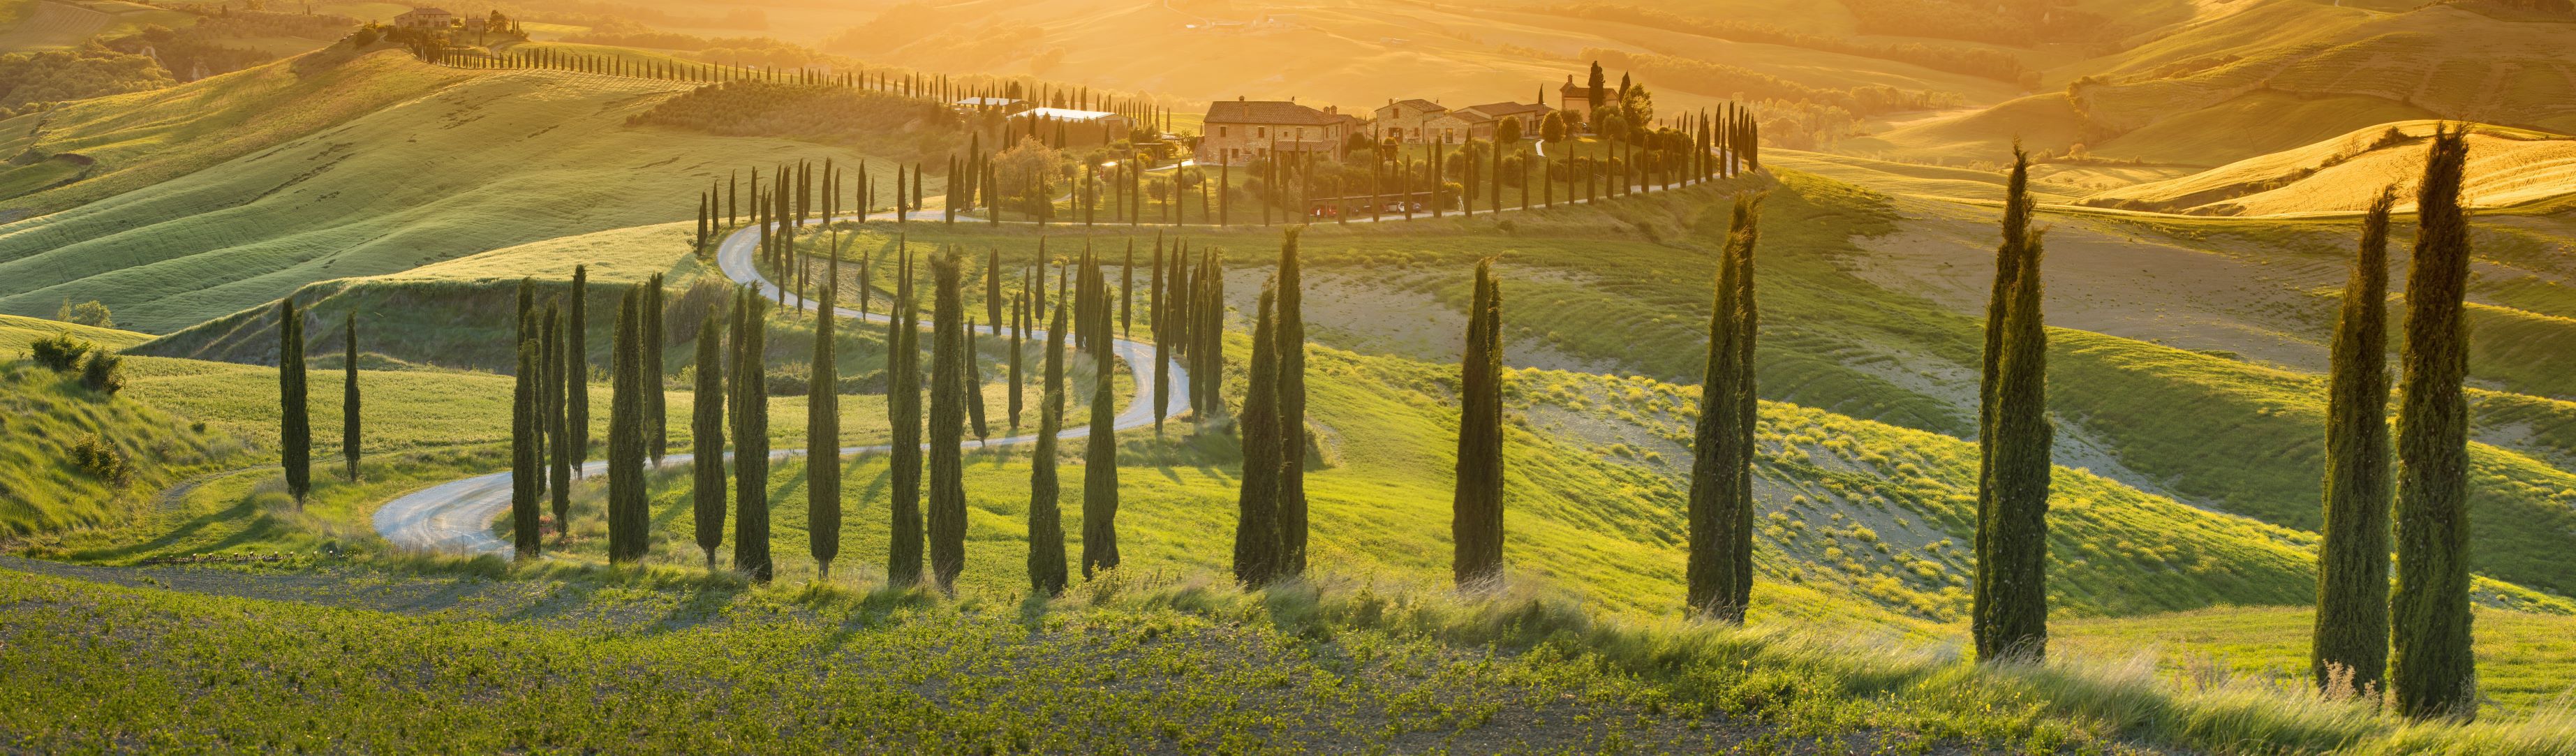 A photo of The Best Wine Tasting Tours in Tuscany